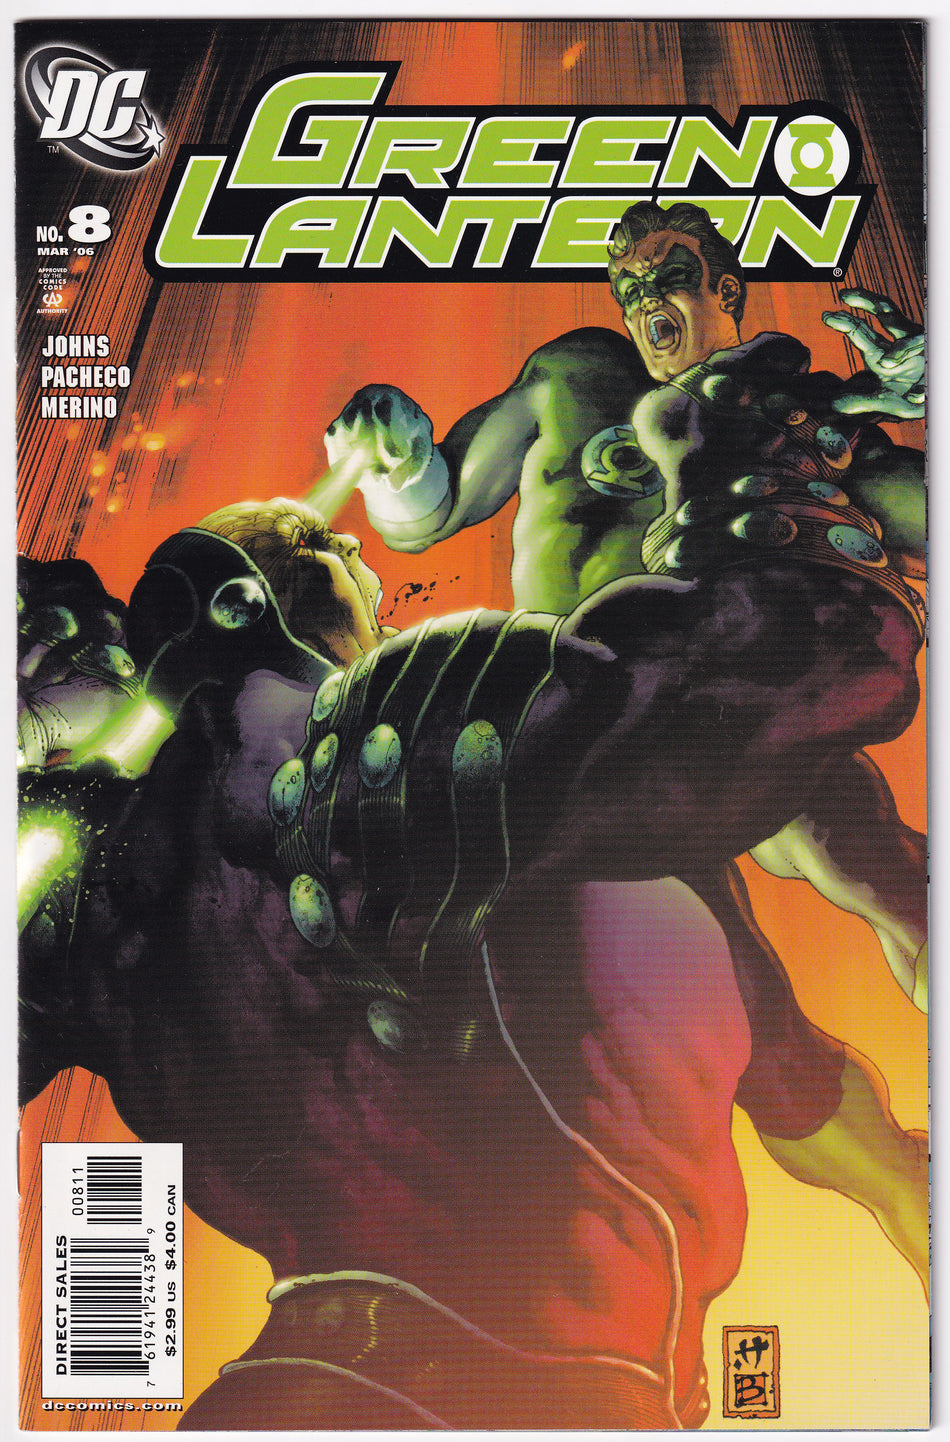 Photo of Green Lantern, Vol. 4 (2006)  Iss 8A comic sold by Stronghold Collectibles